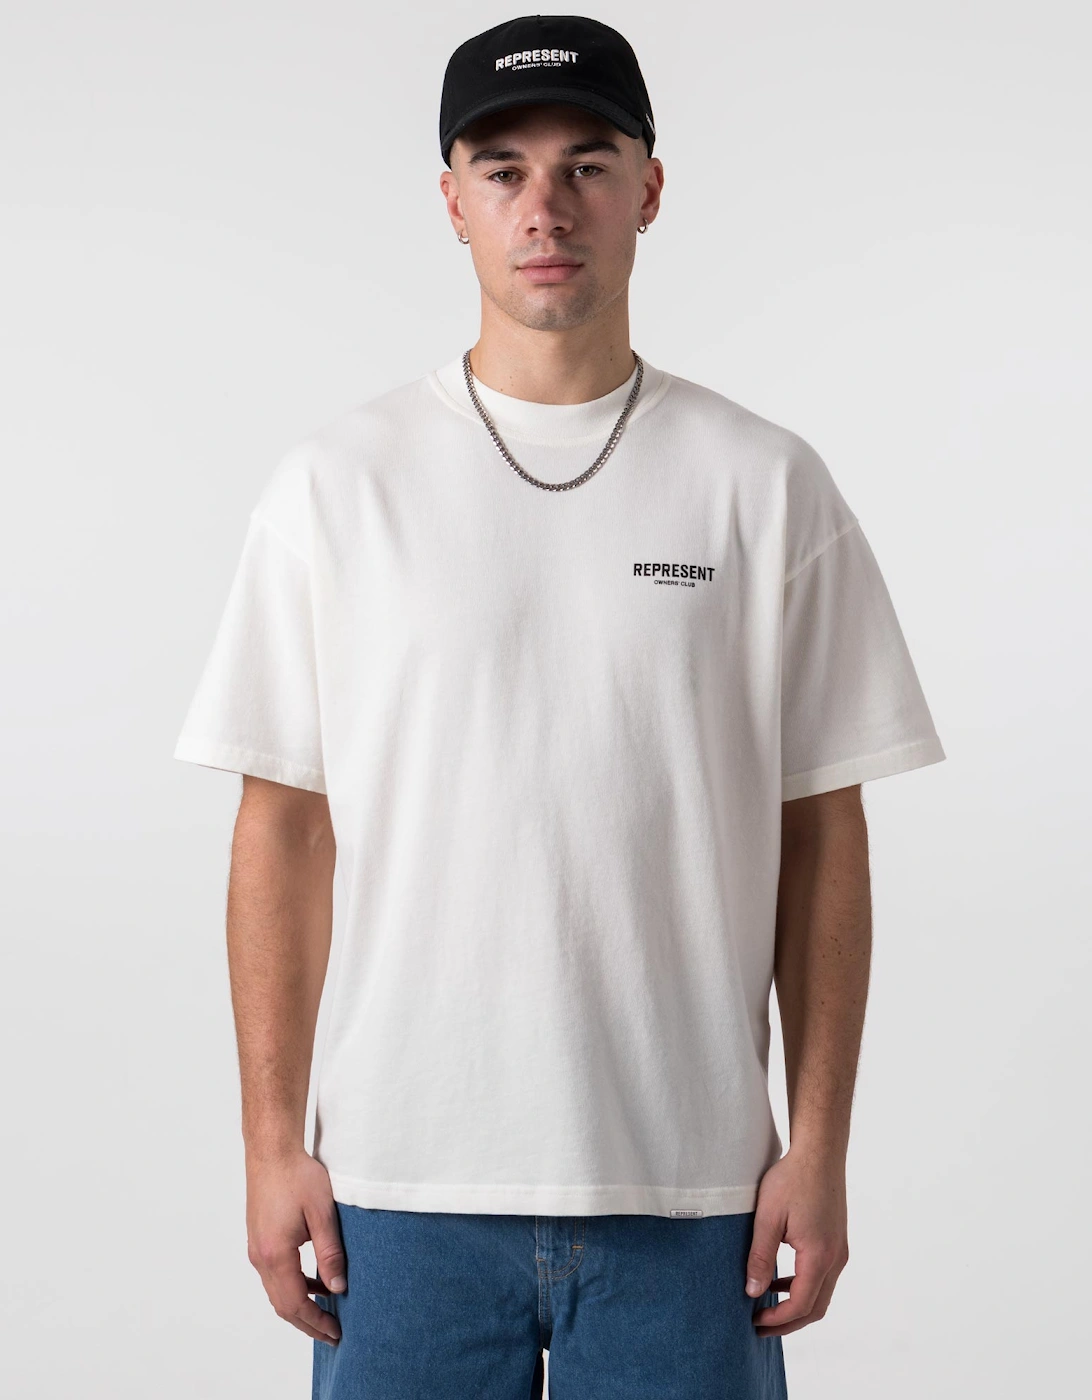 Oversized fit Owners Club T-Shirt